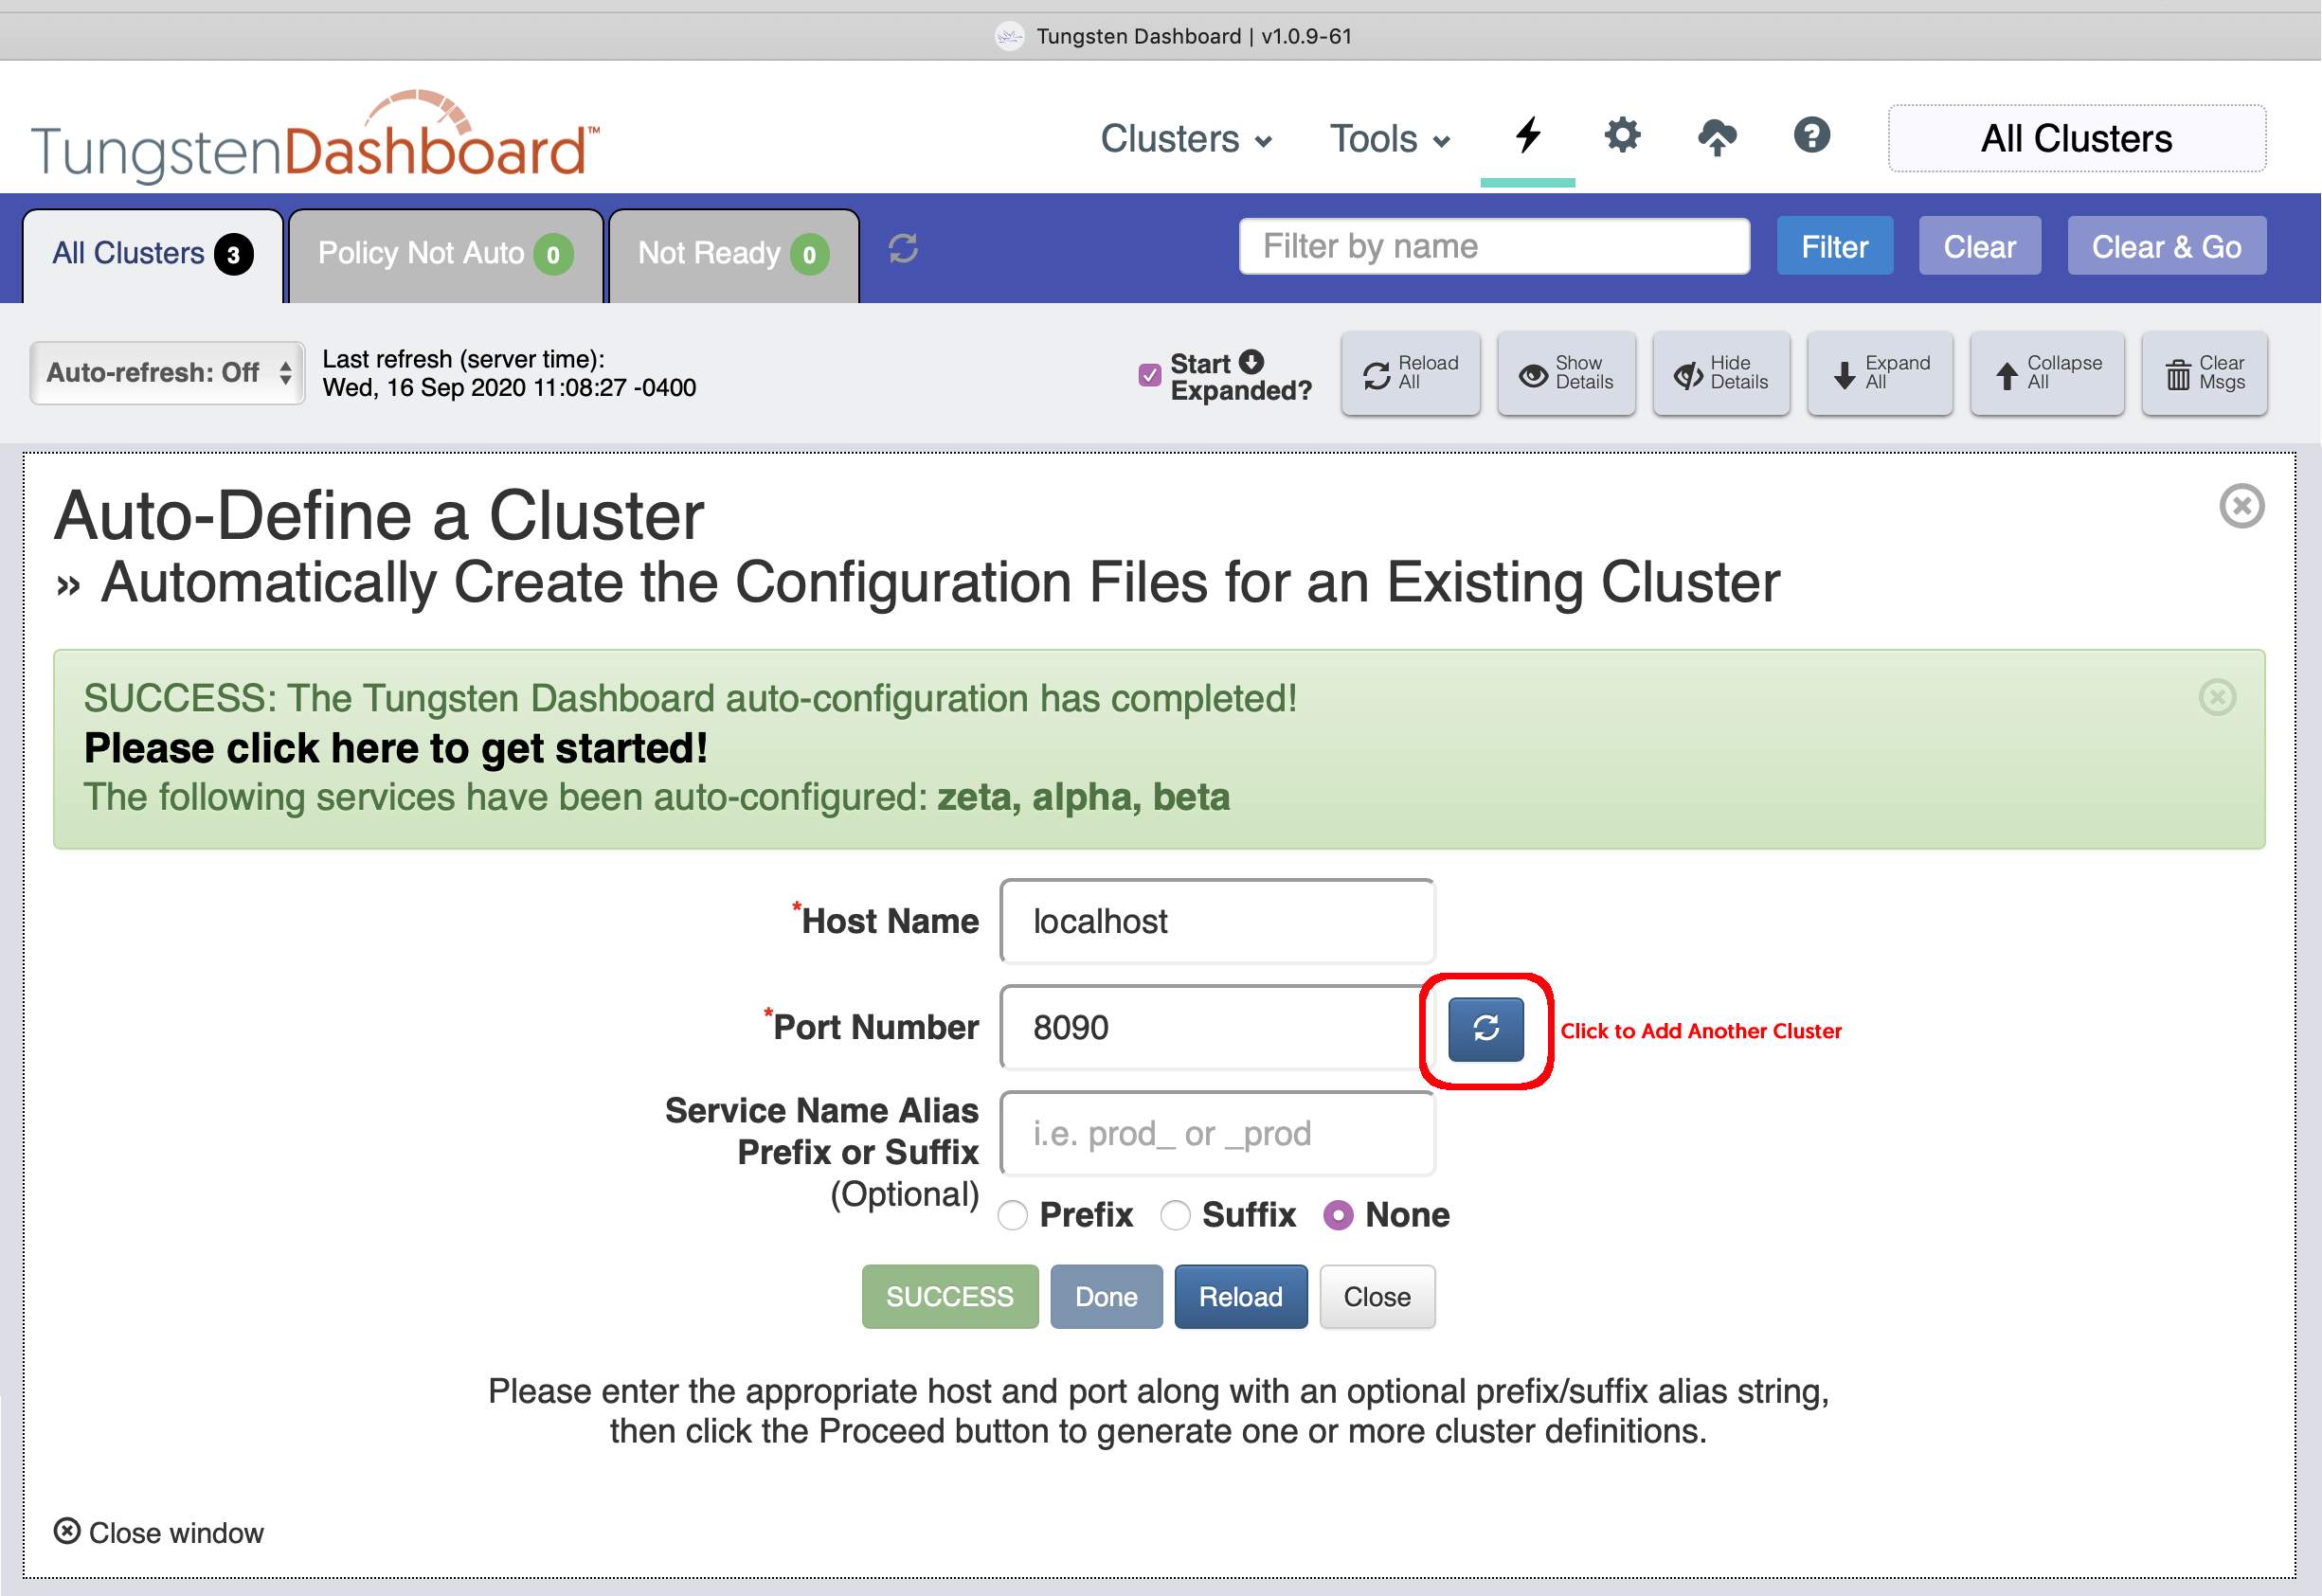 Tungsten Dashboard Auto-Define a Cluster Form Completed